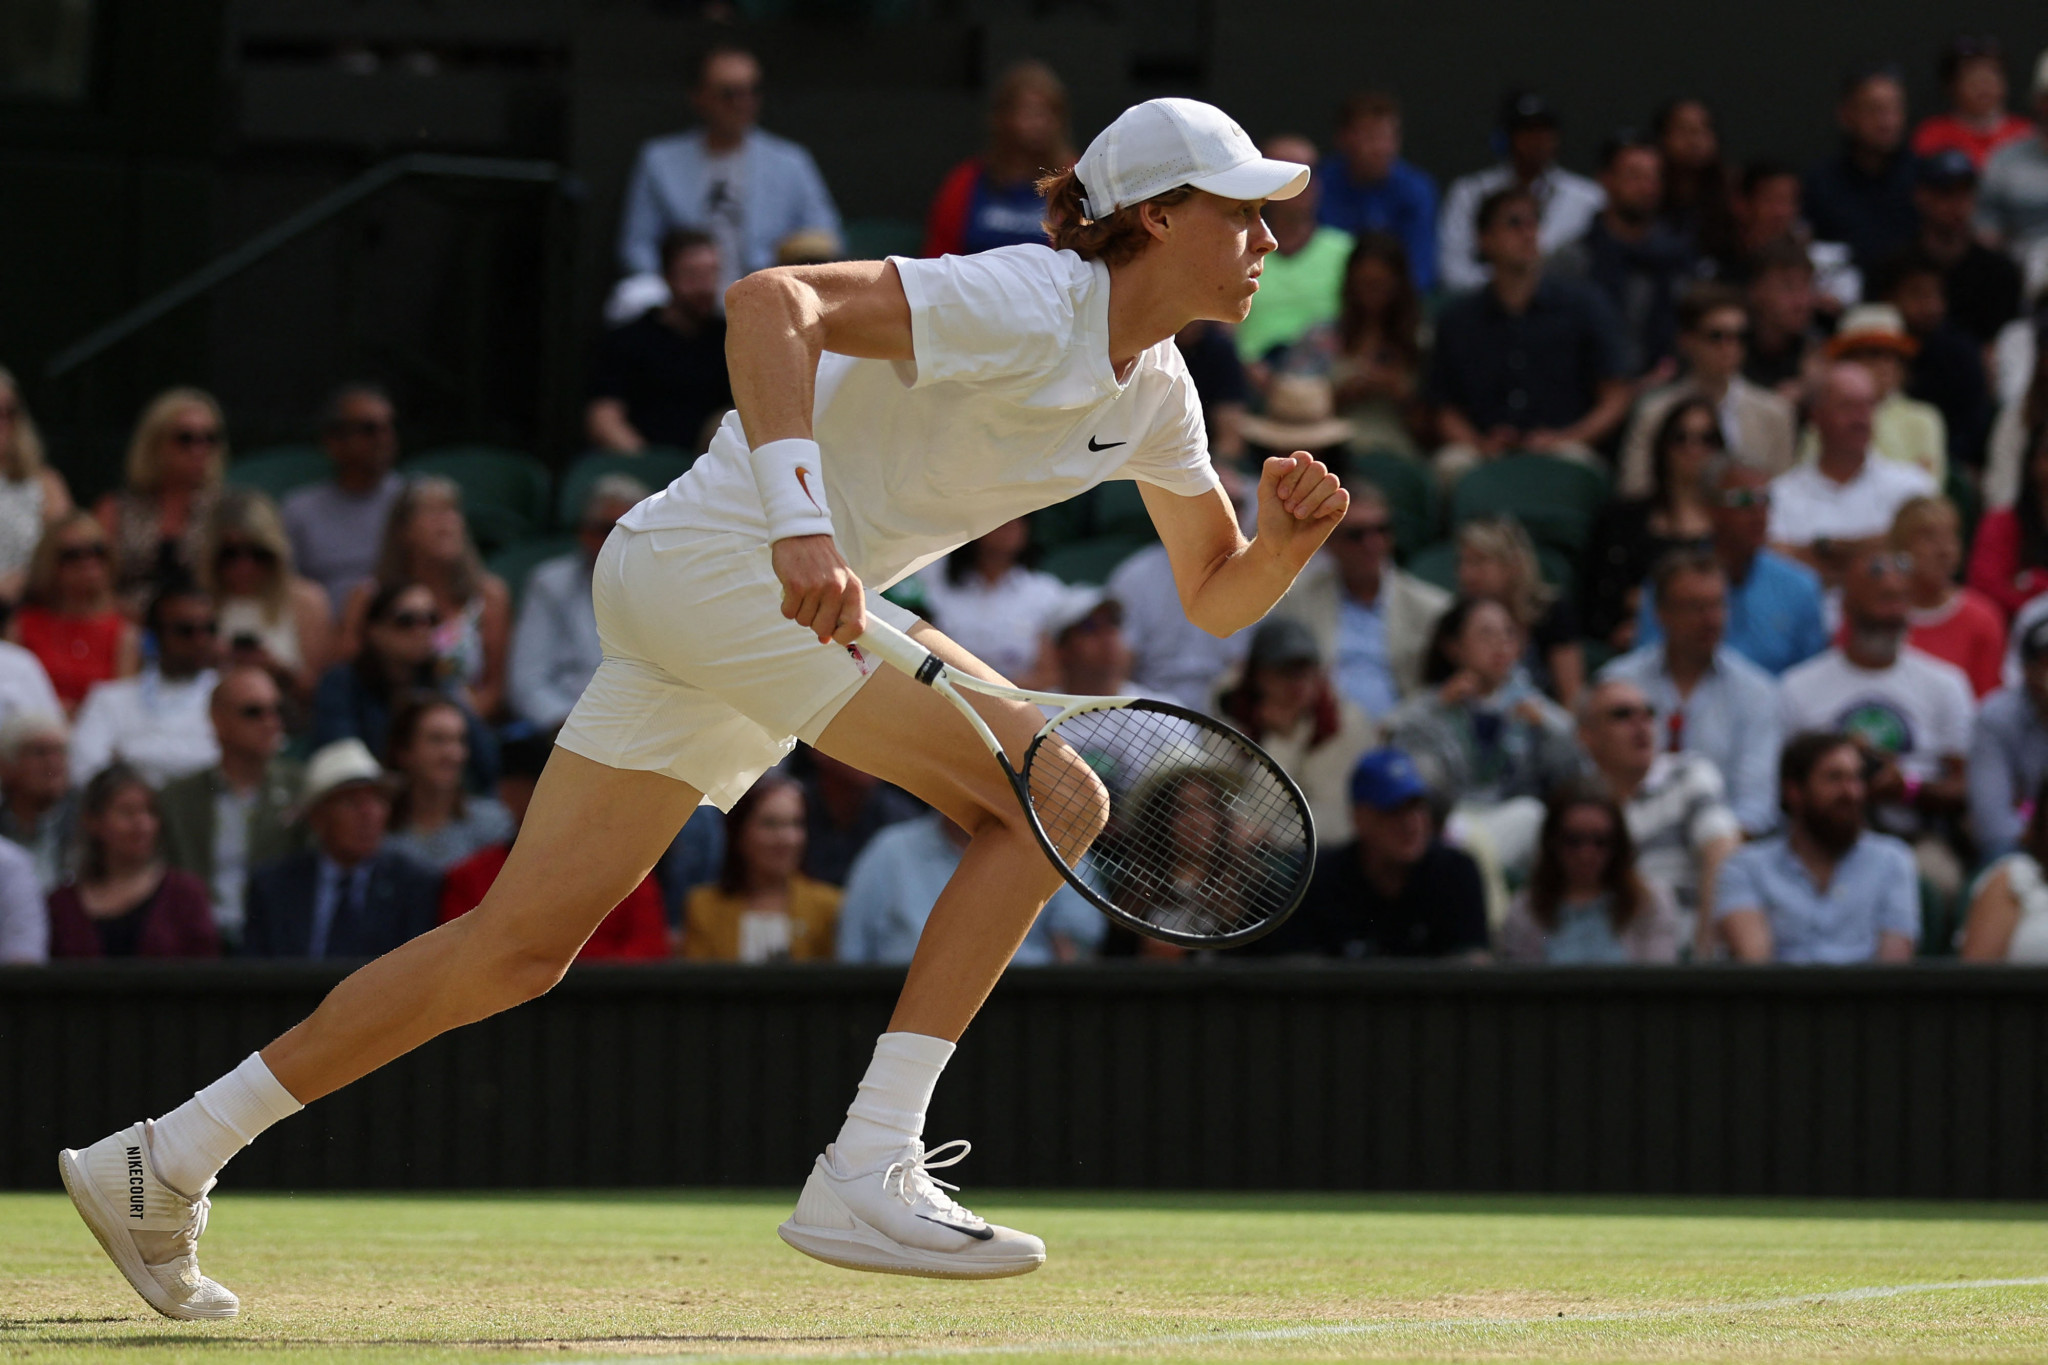 Italy's Jannik Sinner impressed on Wimbledon's Centre Court, beating Spain's Carlos Alcaraz in four sets to reach the quarter-finals ©Getty Images